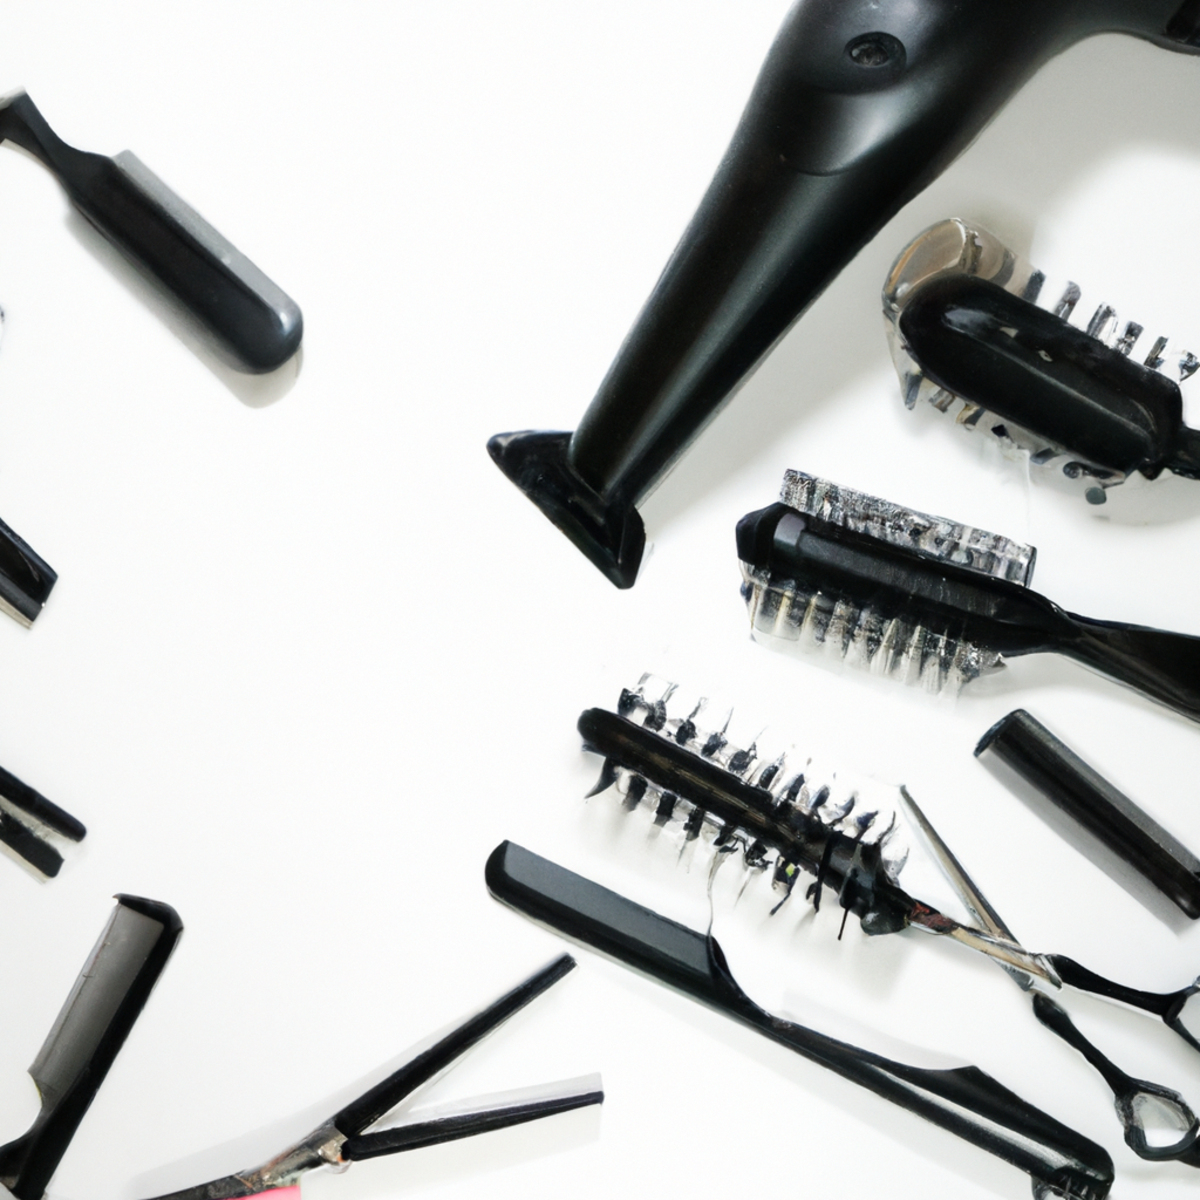 Modern hair styling tools for safe and healthy hair care.